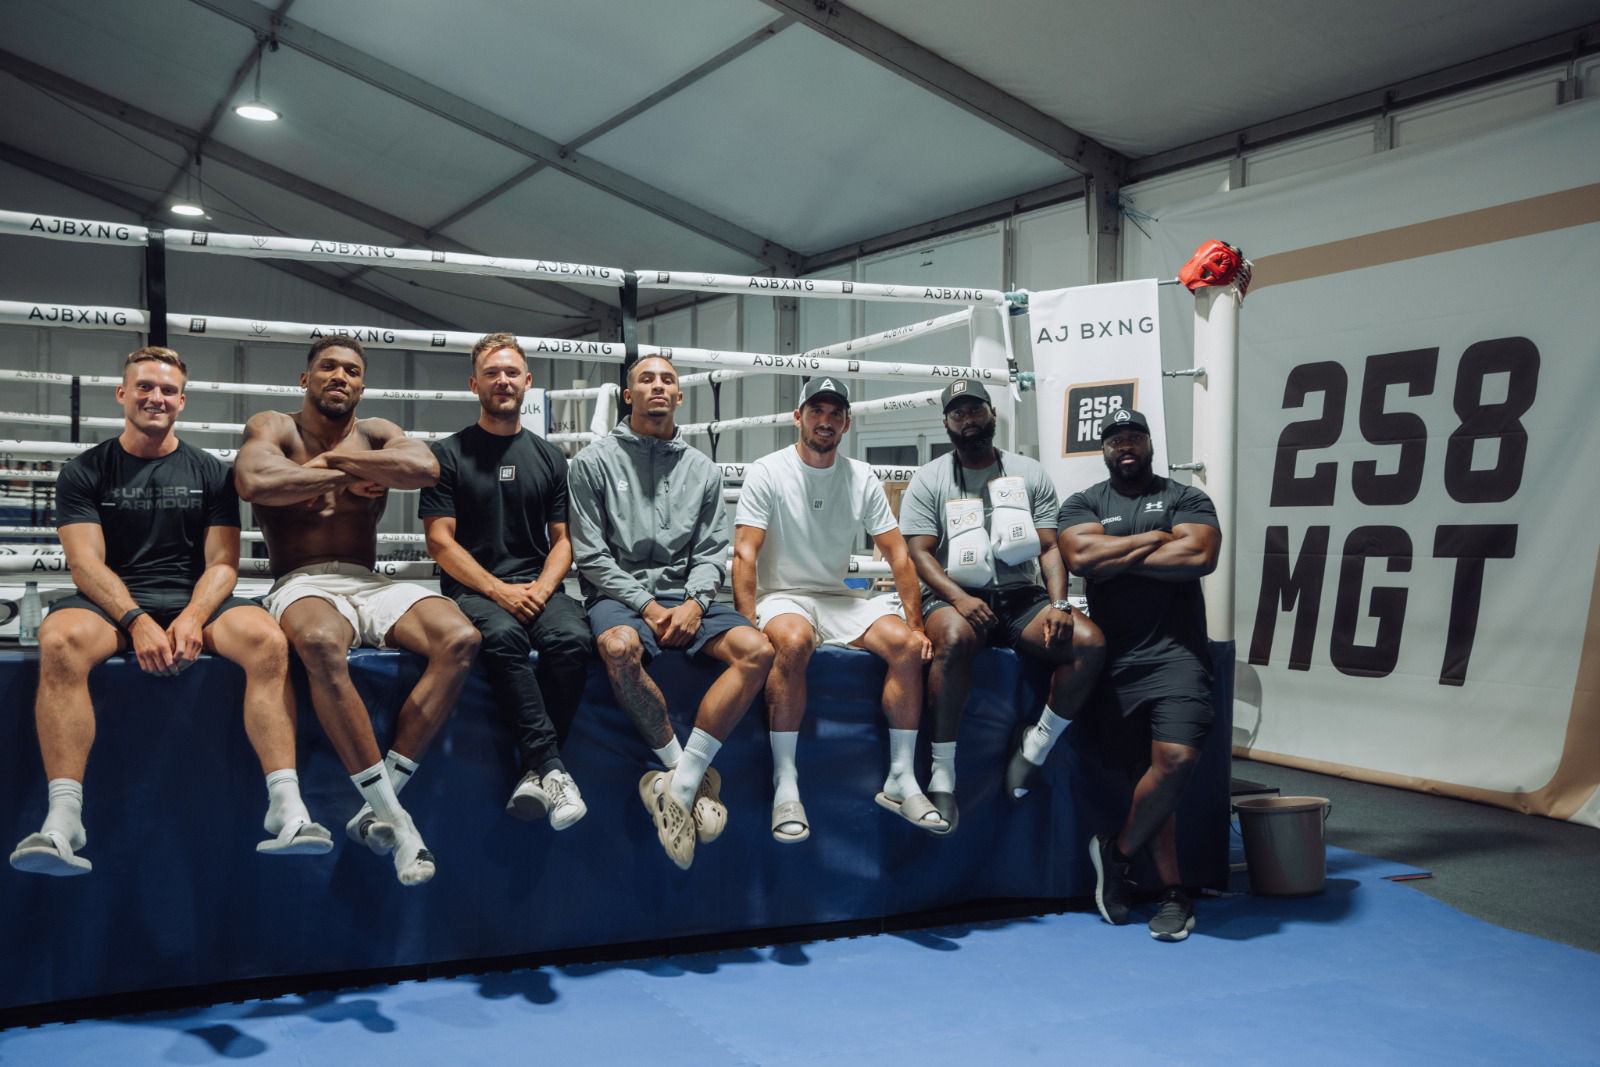 groep knecht ik luister naar muziek Evelyn Partners and Anthony Joshua's 258 MGT launch new financial advice  programme for boxing professionals | Evelyn Partners